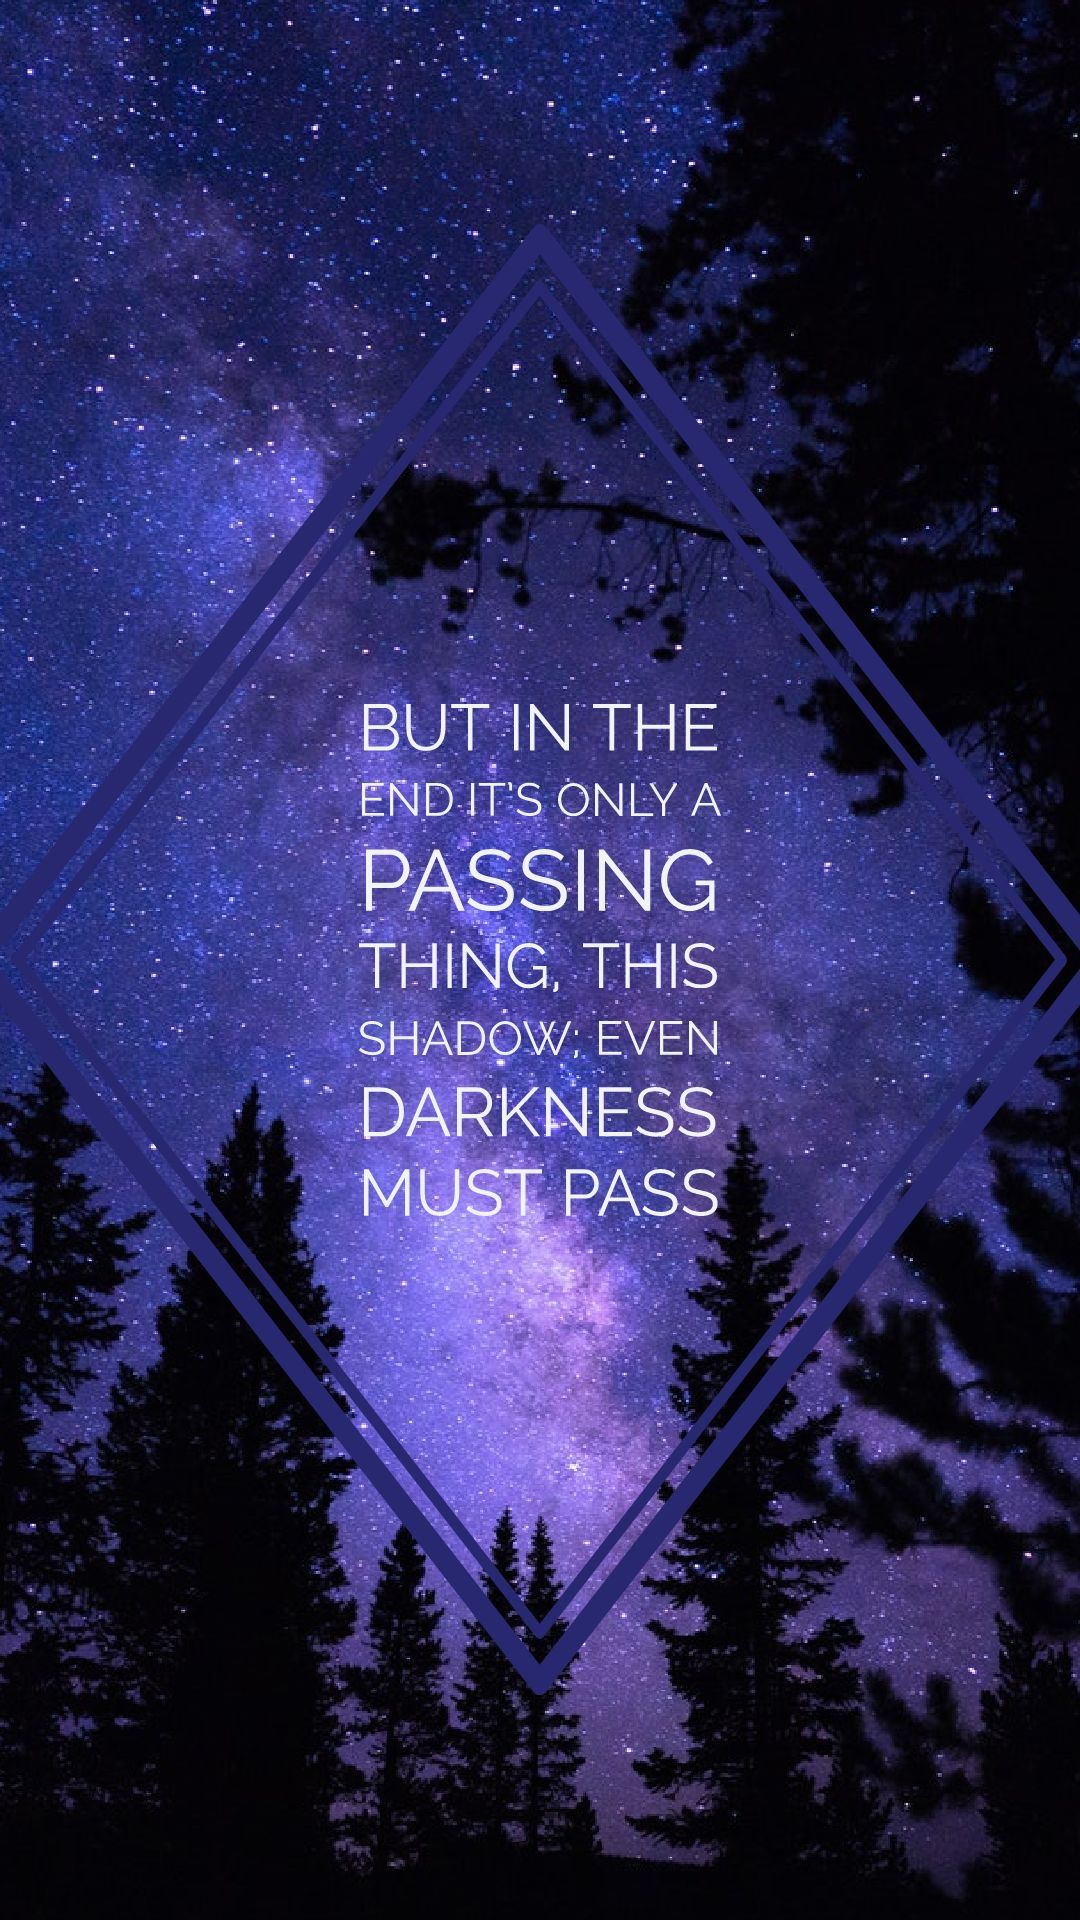 Quotes From “The Lord Of The Rings” | Others